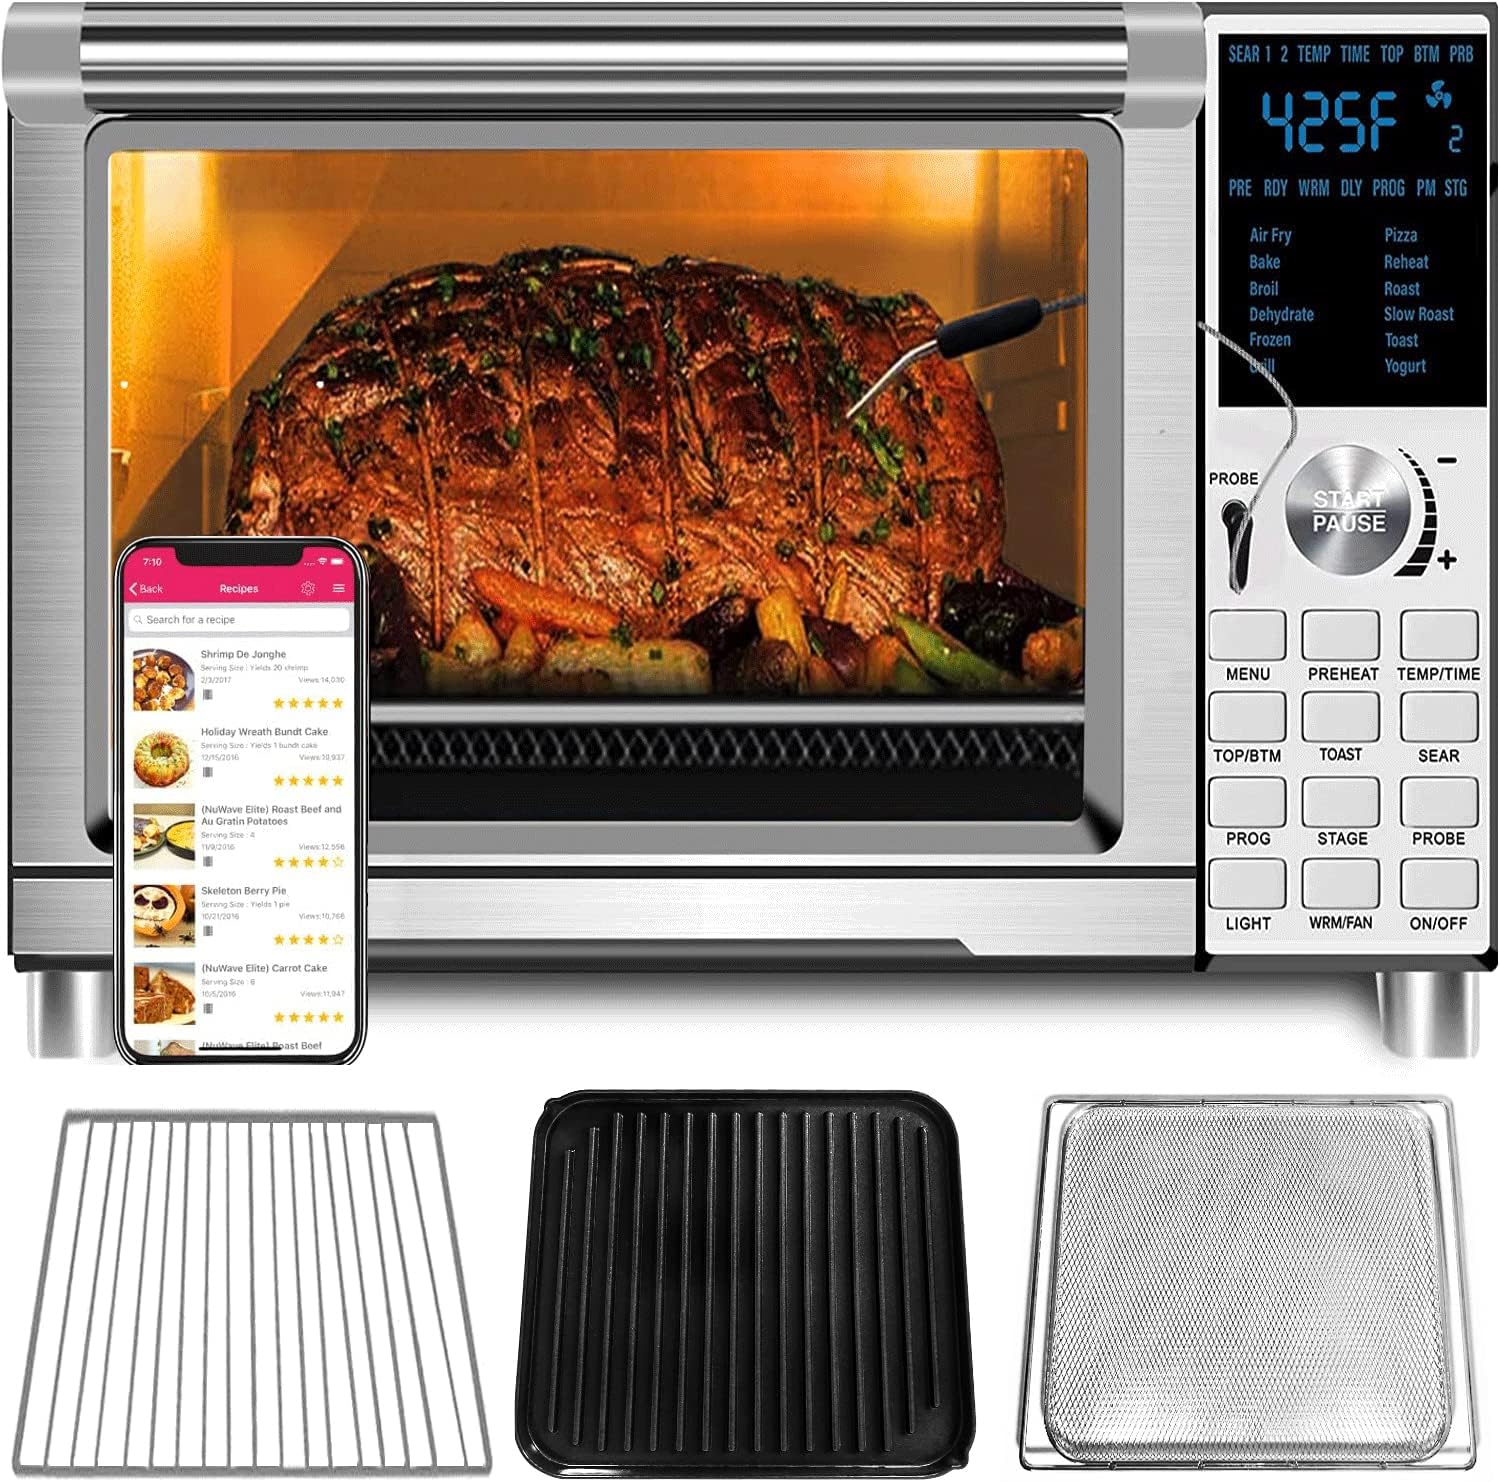 uwave Bravo XL Air Fryer Toaster Smart Oven, 12-in-1 Countertop Grill/Griddle Combo